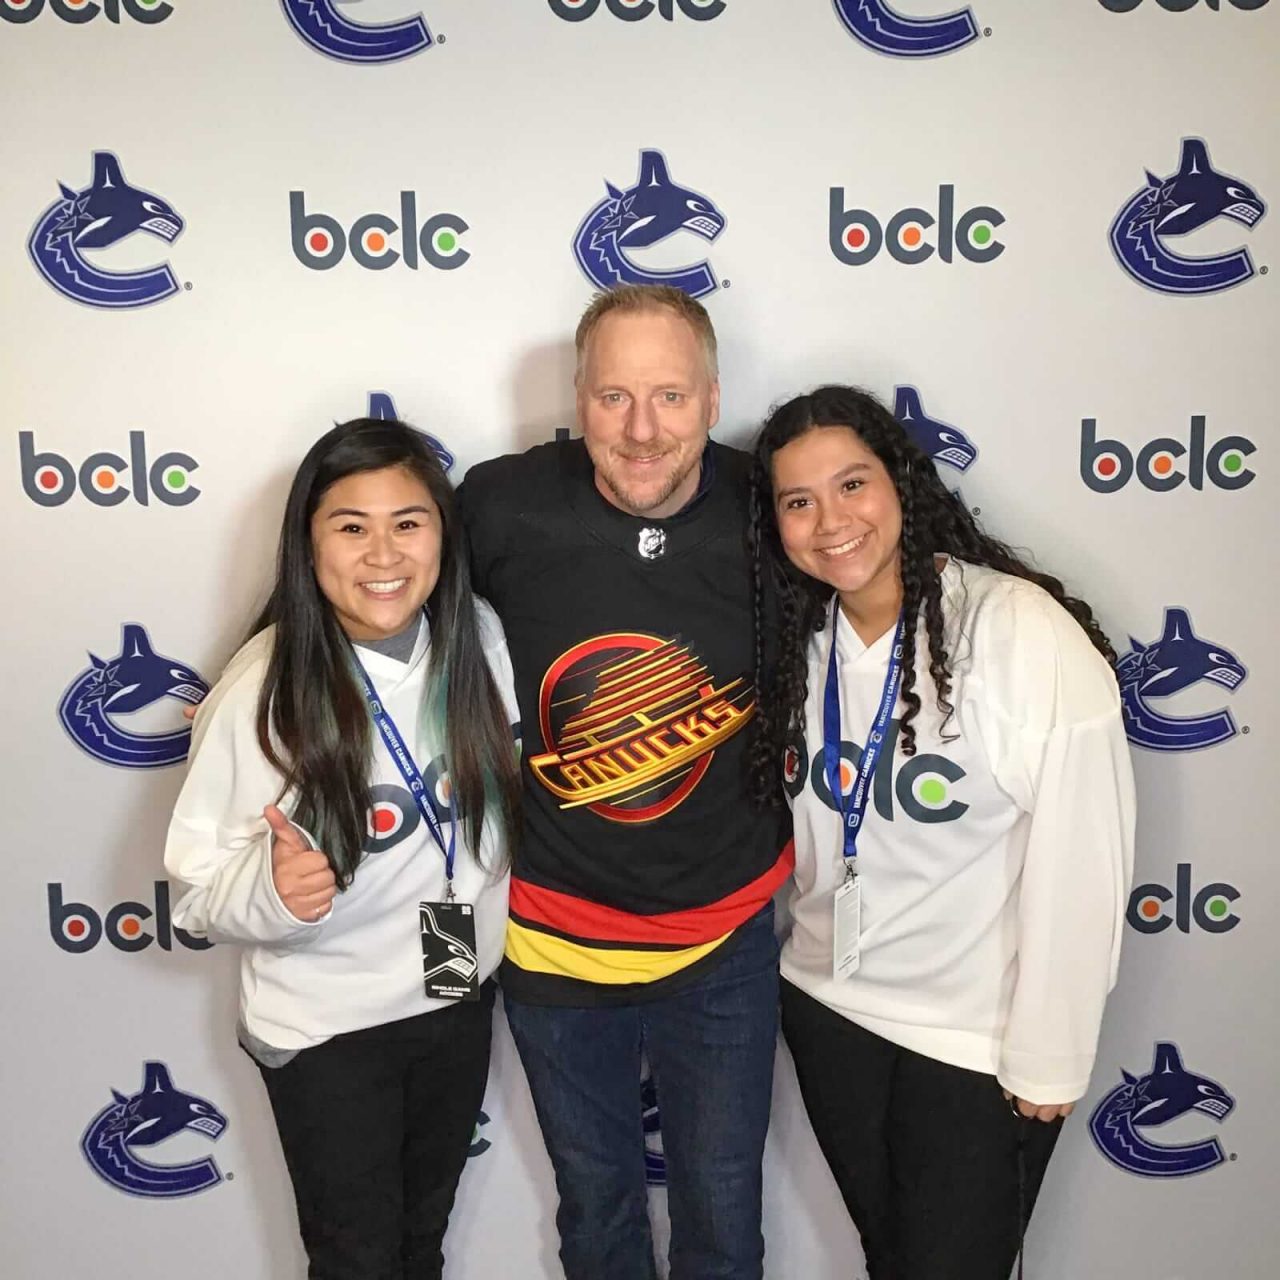 Corey Hirsch at the BCLC photo booth